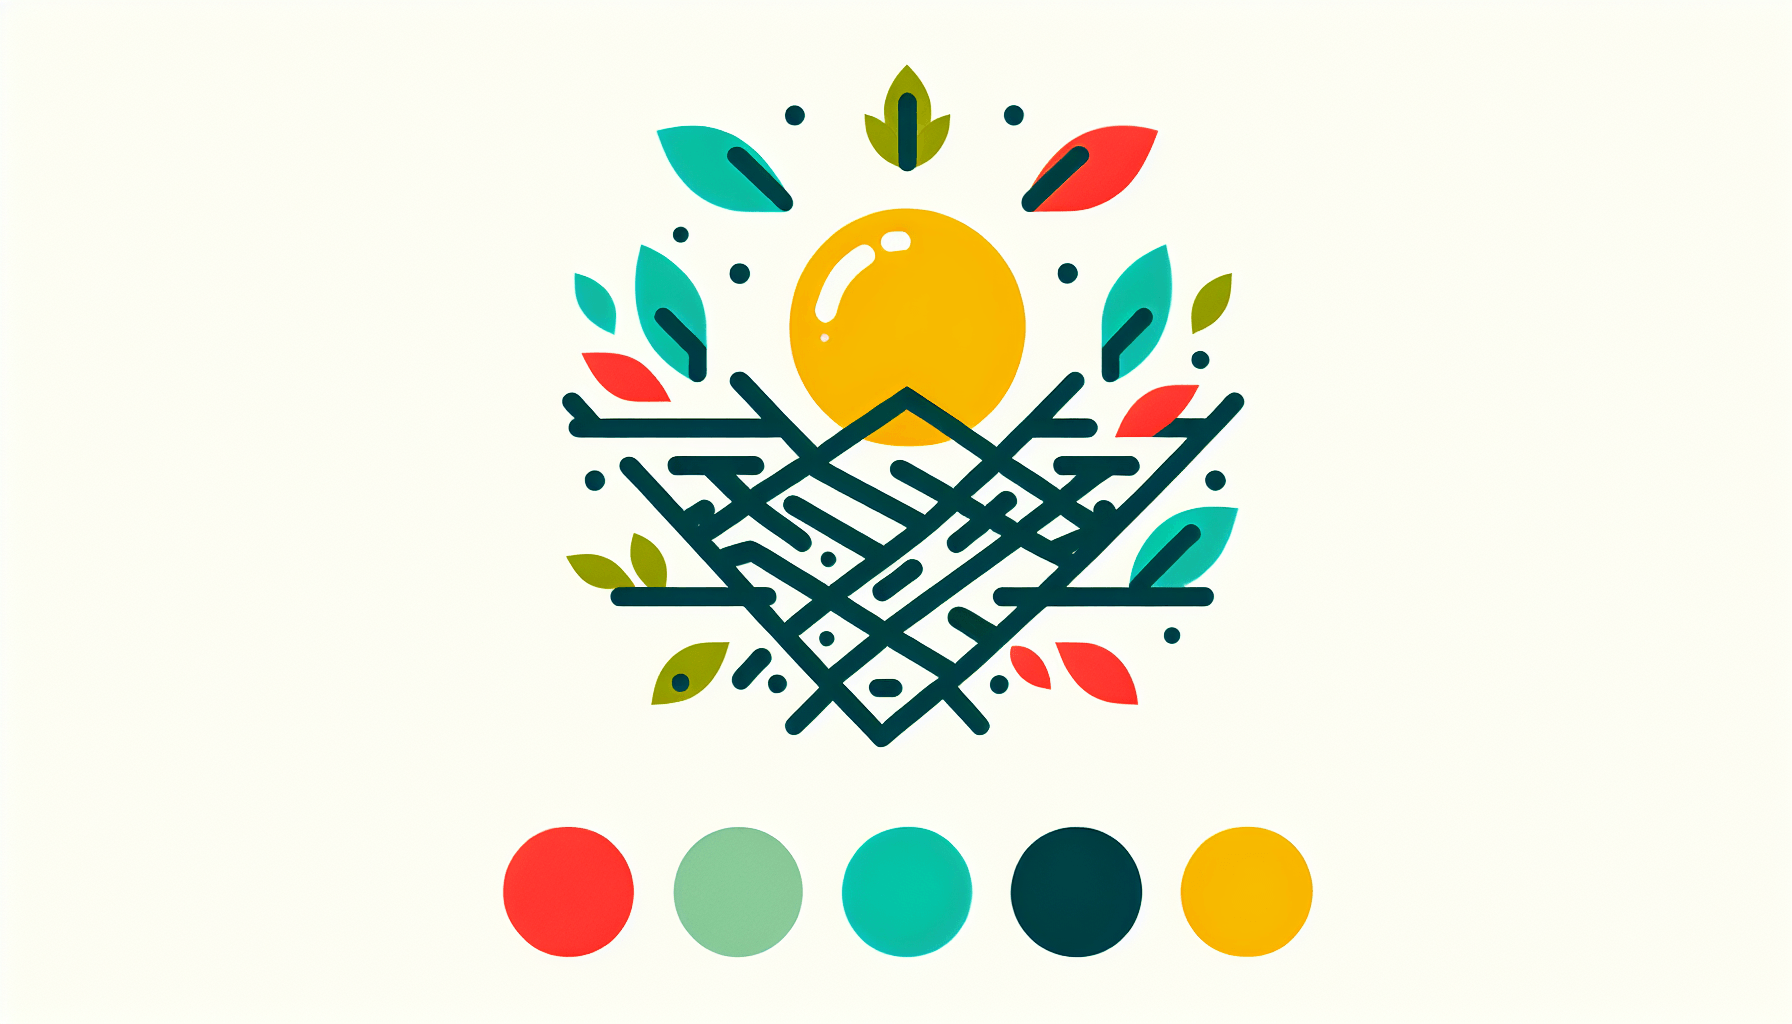 Nest in flat illustration style and white background, red #f47574, green #88c7a8, yellow #fcc44b, and blue #645bc8 colors.